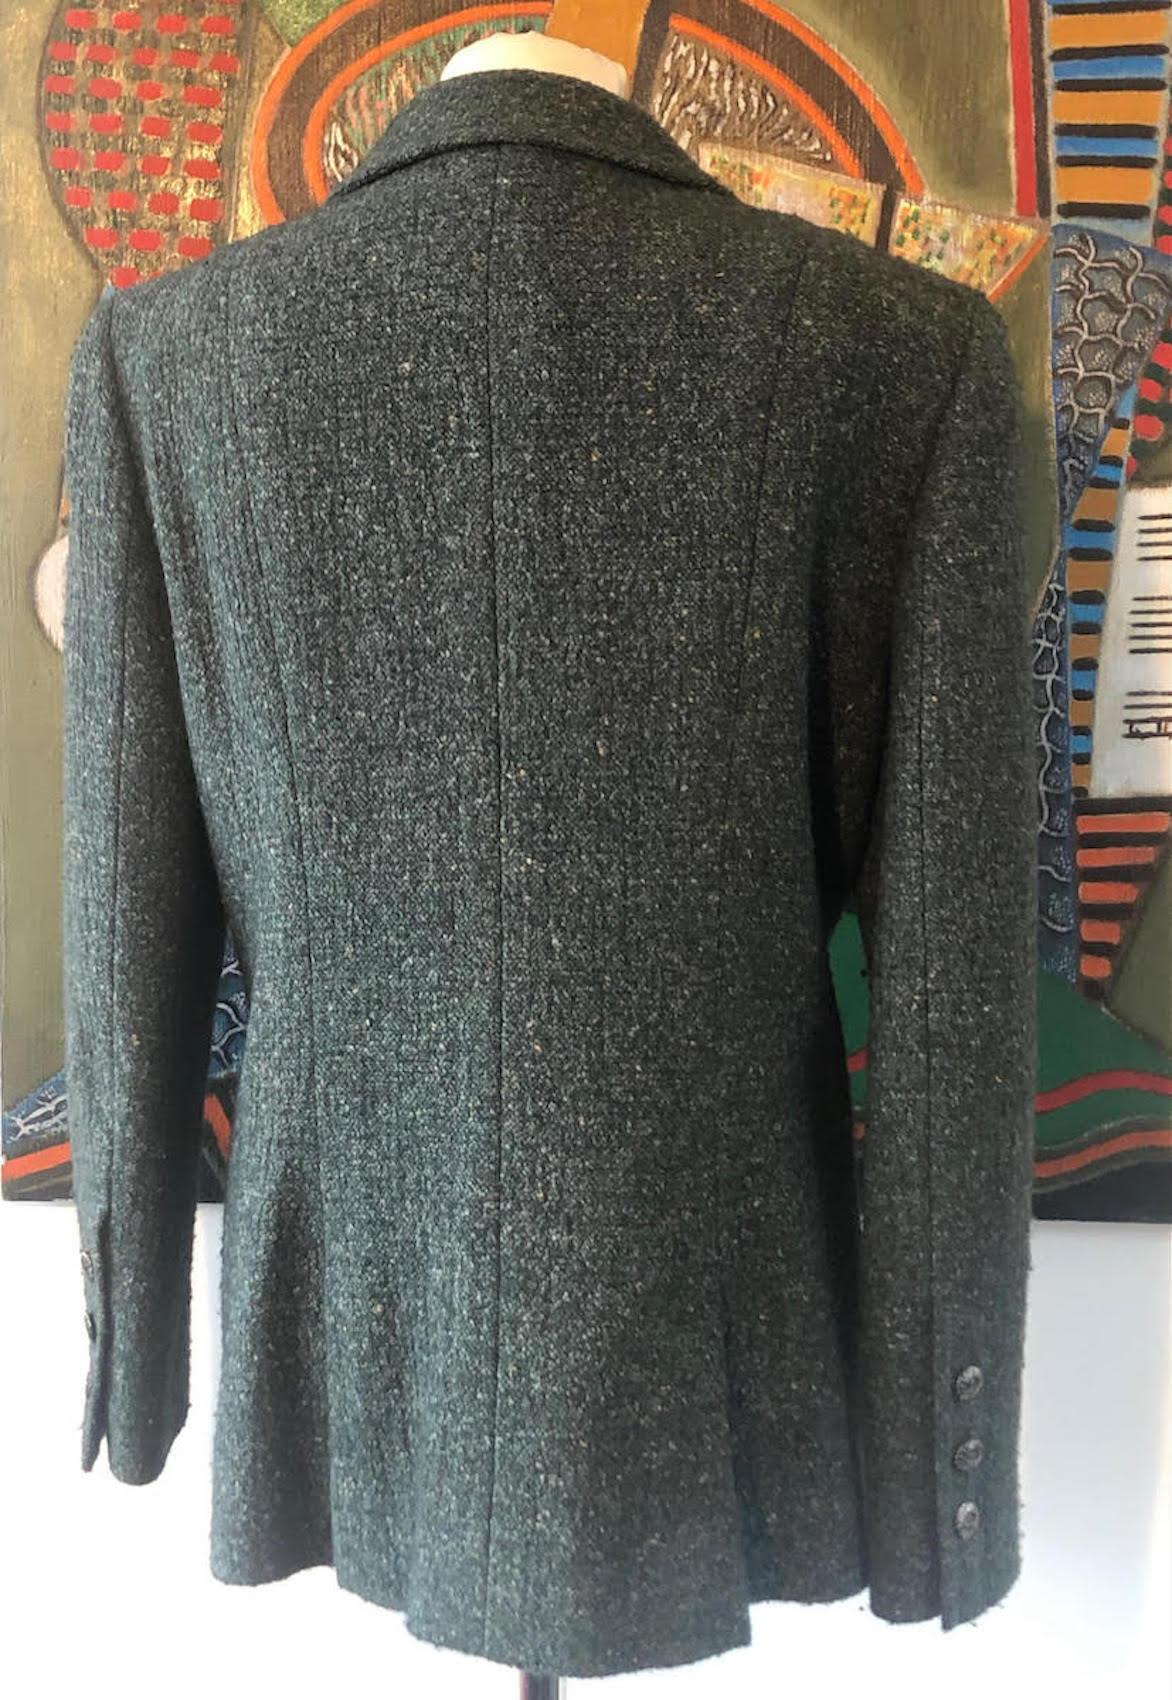 CHANEL 1997 Green Tweed Wool Bouclé Jacket Pre-Owned Double Breasted 2